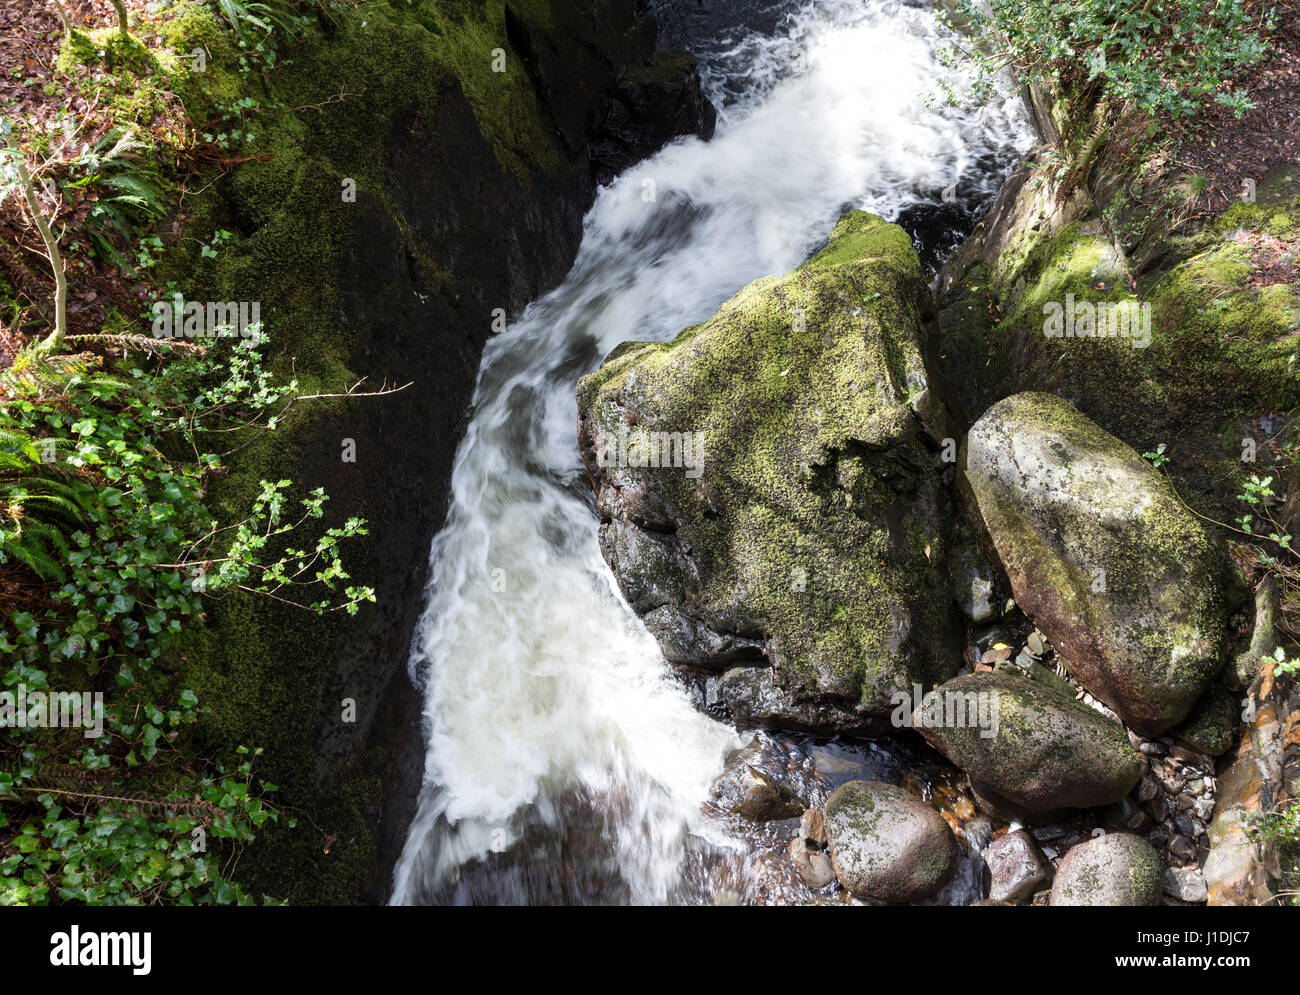 Boulder Worn into the Shape of a Trolls Head Laying in a Stream Bed, Glen Trool, Galloway Hills, Scotland Stock Photo